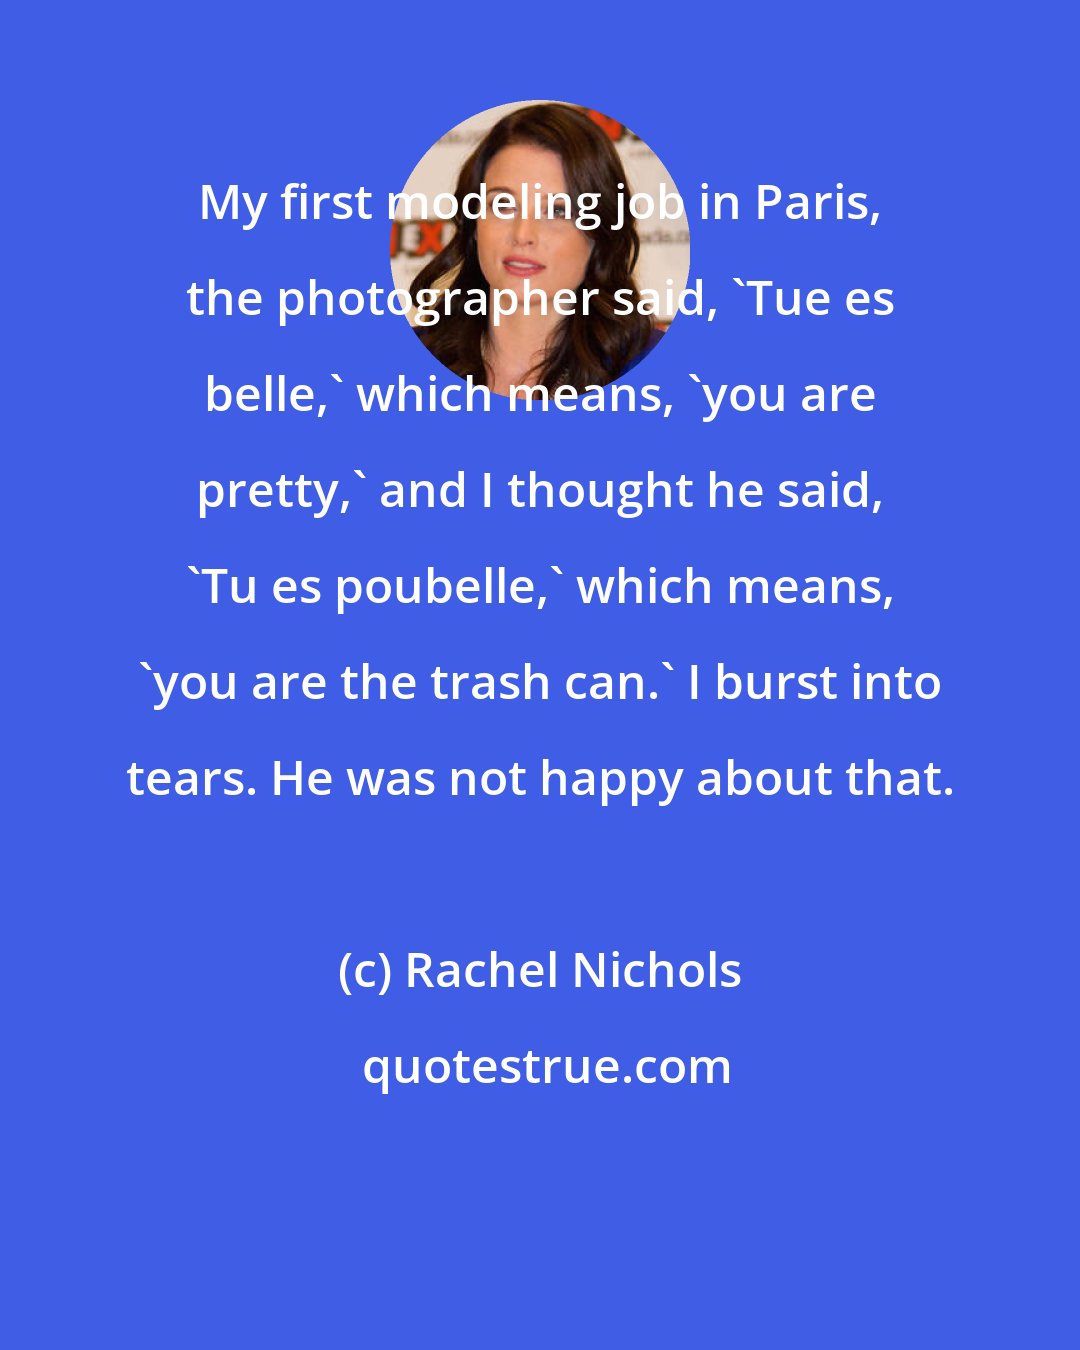 Rachel Nichols: My first modeling job in Paris, the photographer said, 'Tue es belle,' which means, 'you are pretty,' and I thought he said, 'Tu es poubelle,' which means, 'you are the trash can.' I burst into tears. He was not happy about that.